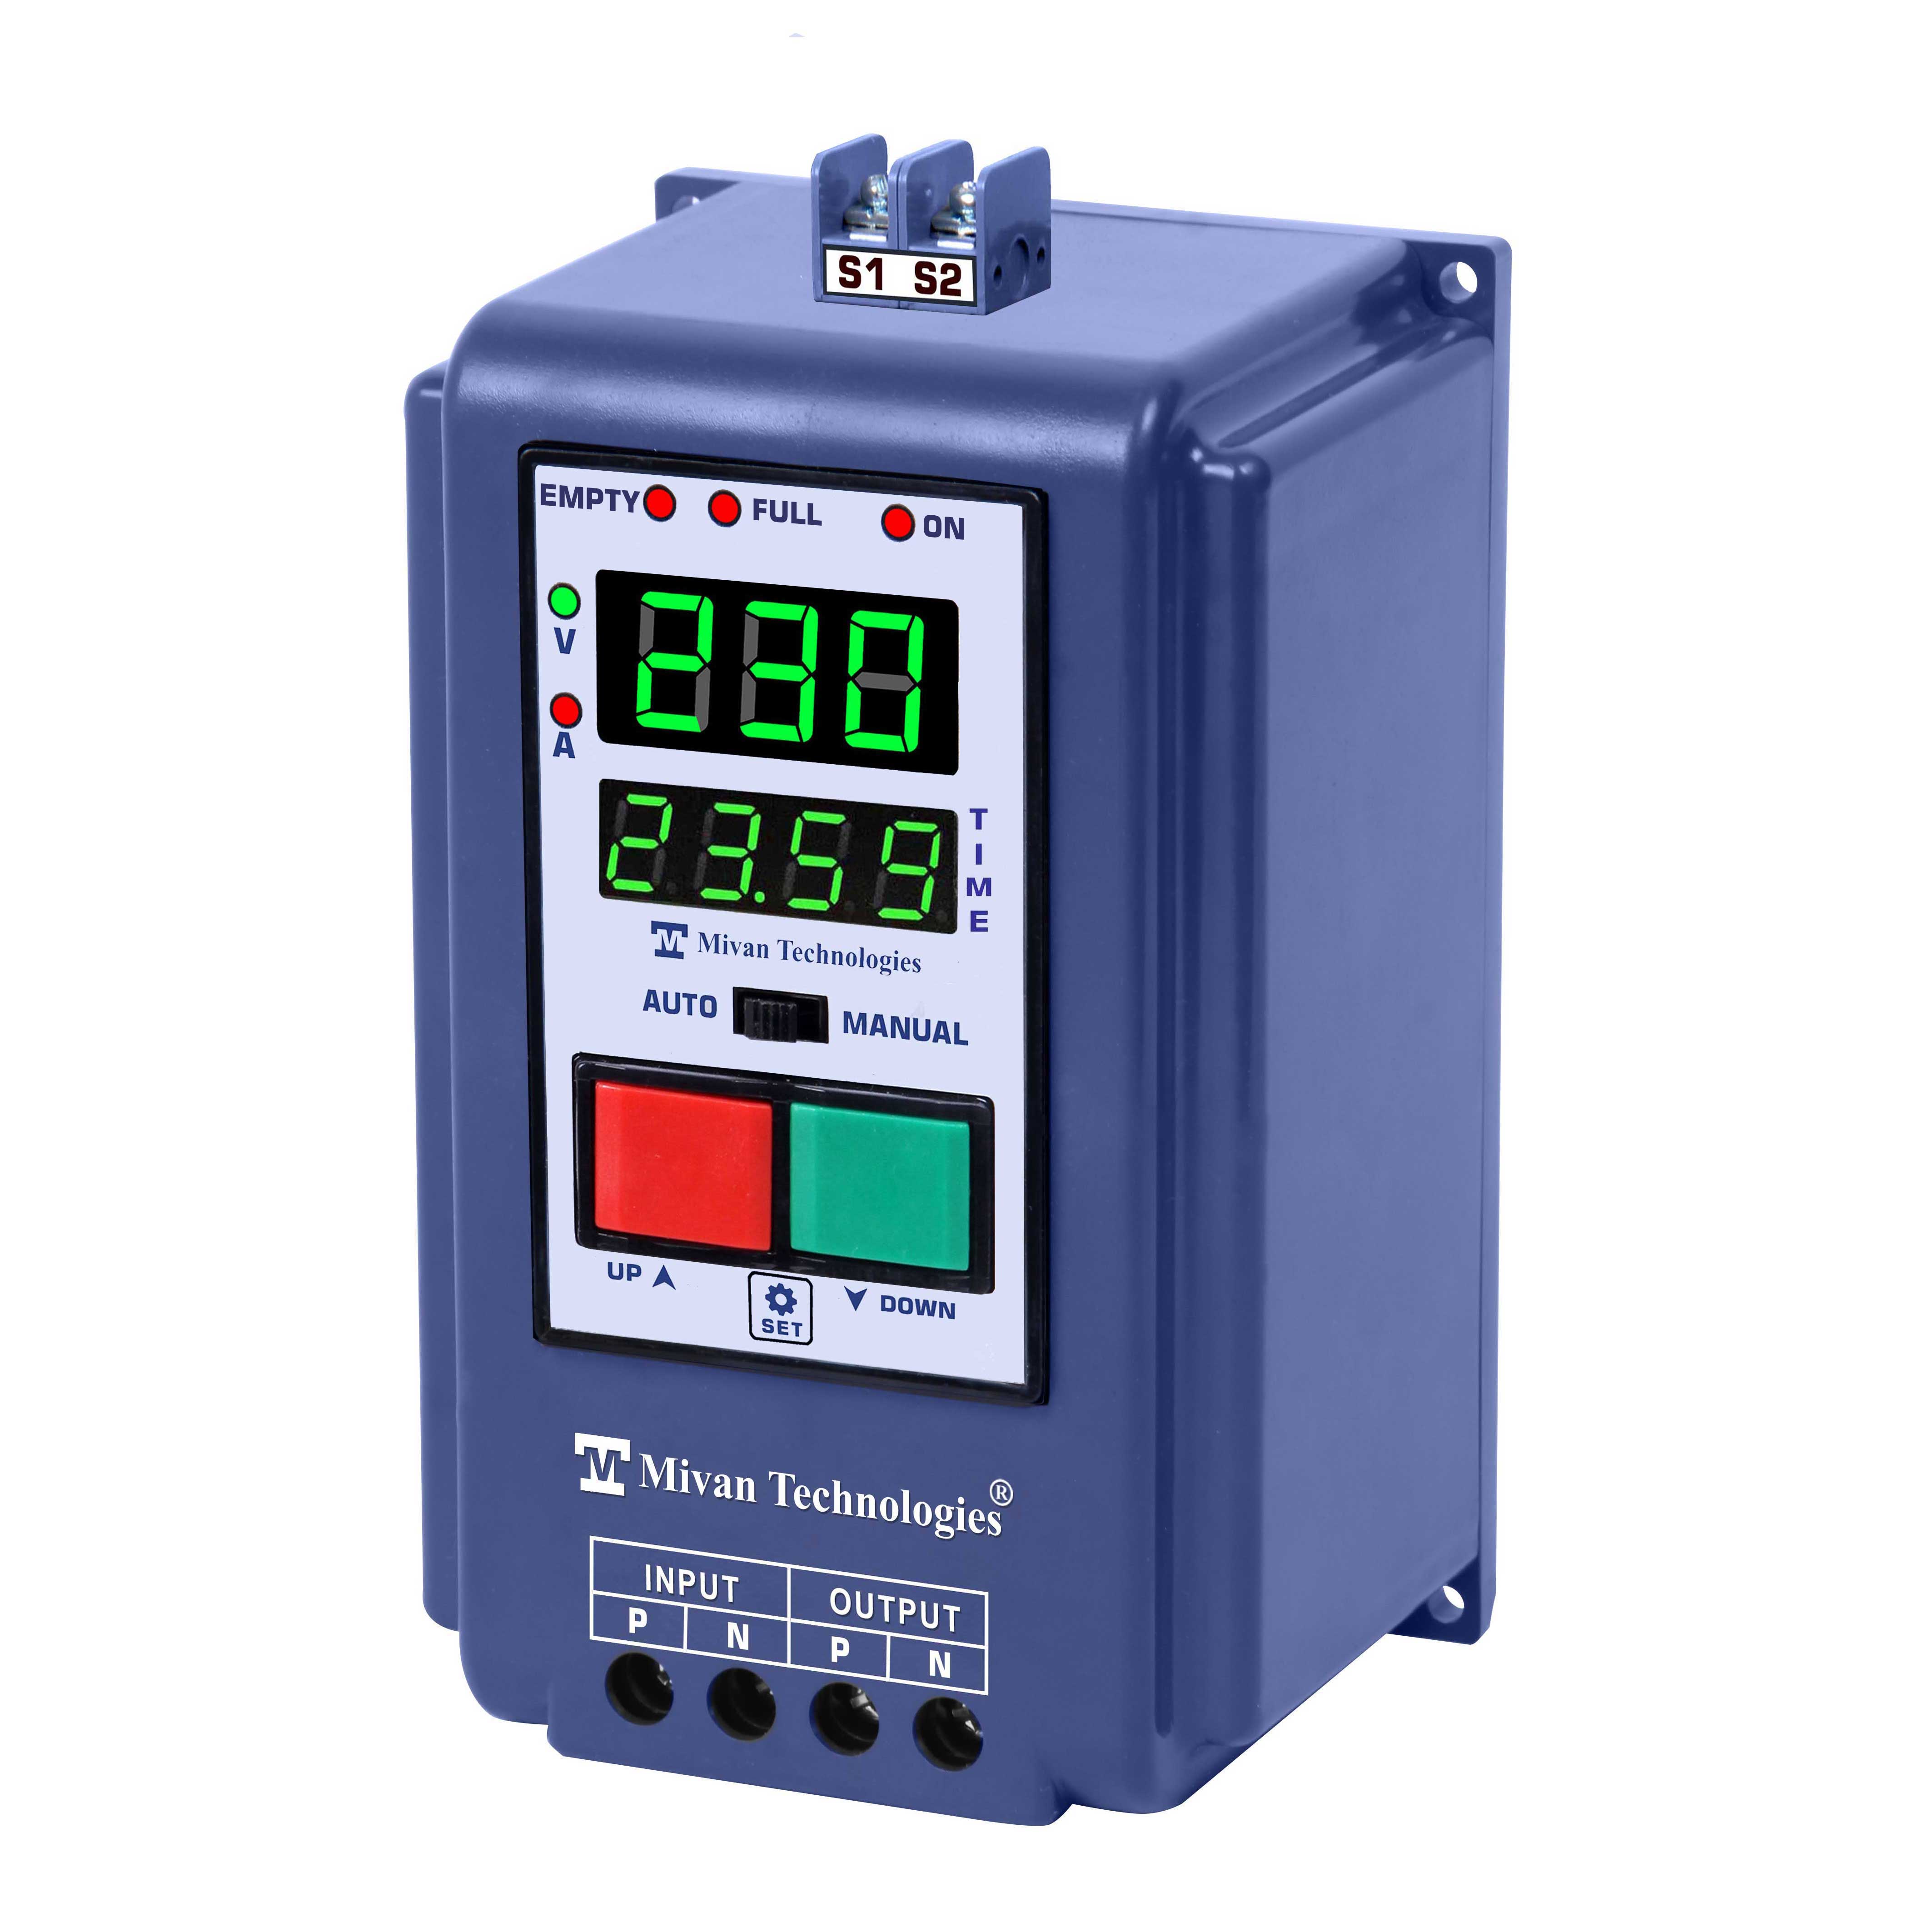 WLC RL RTC HD Digital semi automatic water controller with REAL TIME TIMER with V A meter with HV LV OL DRY PROTECTION